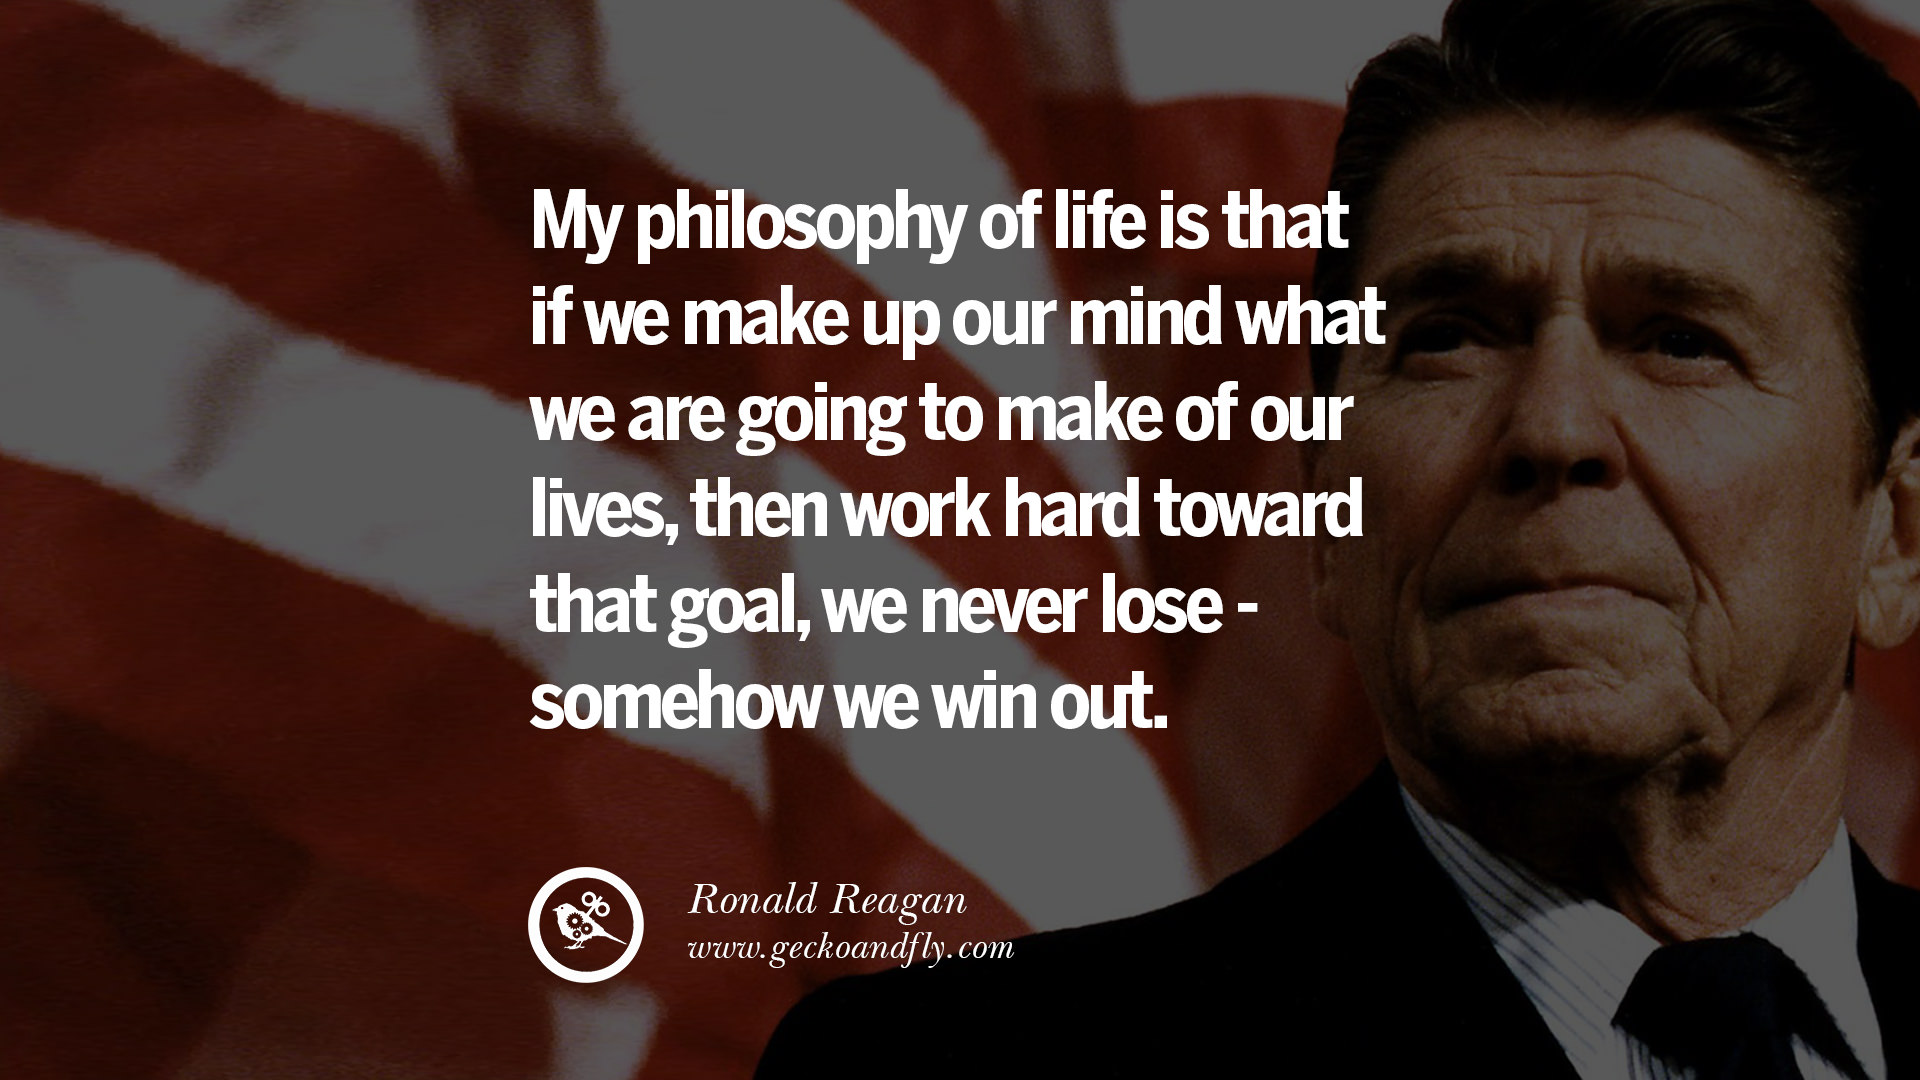 Ronald Reagan Quotes on Welfare, Liberalism, Government and Politics